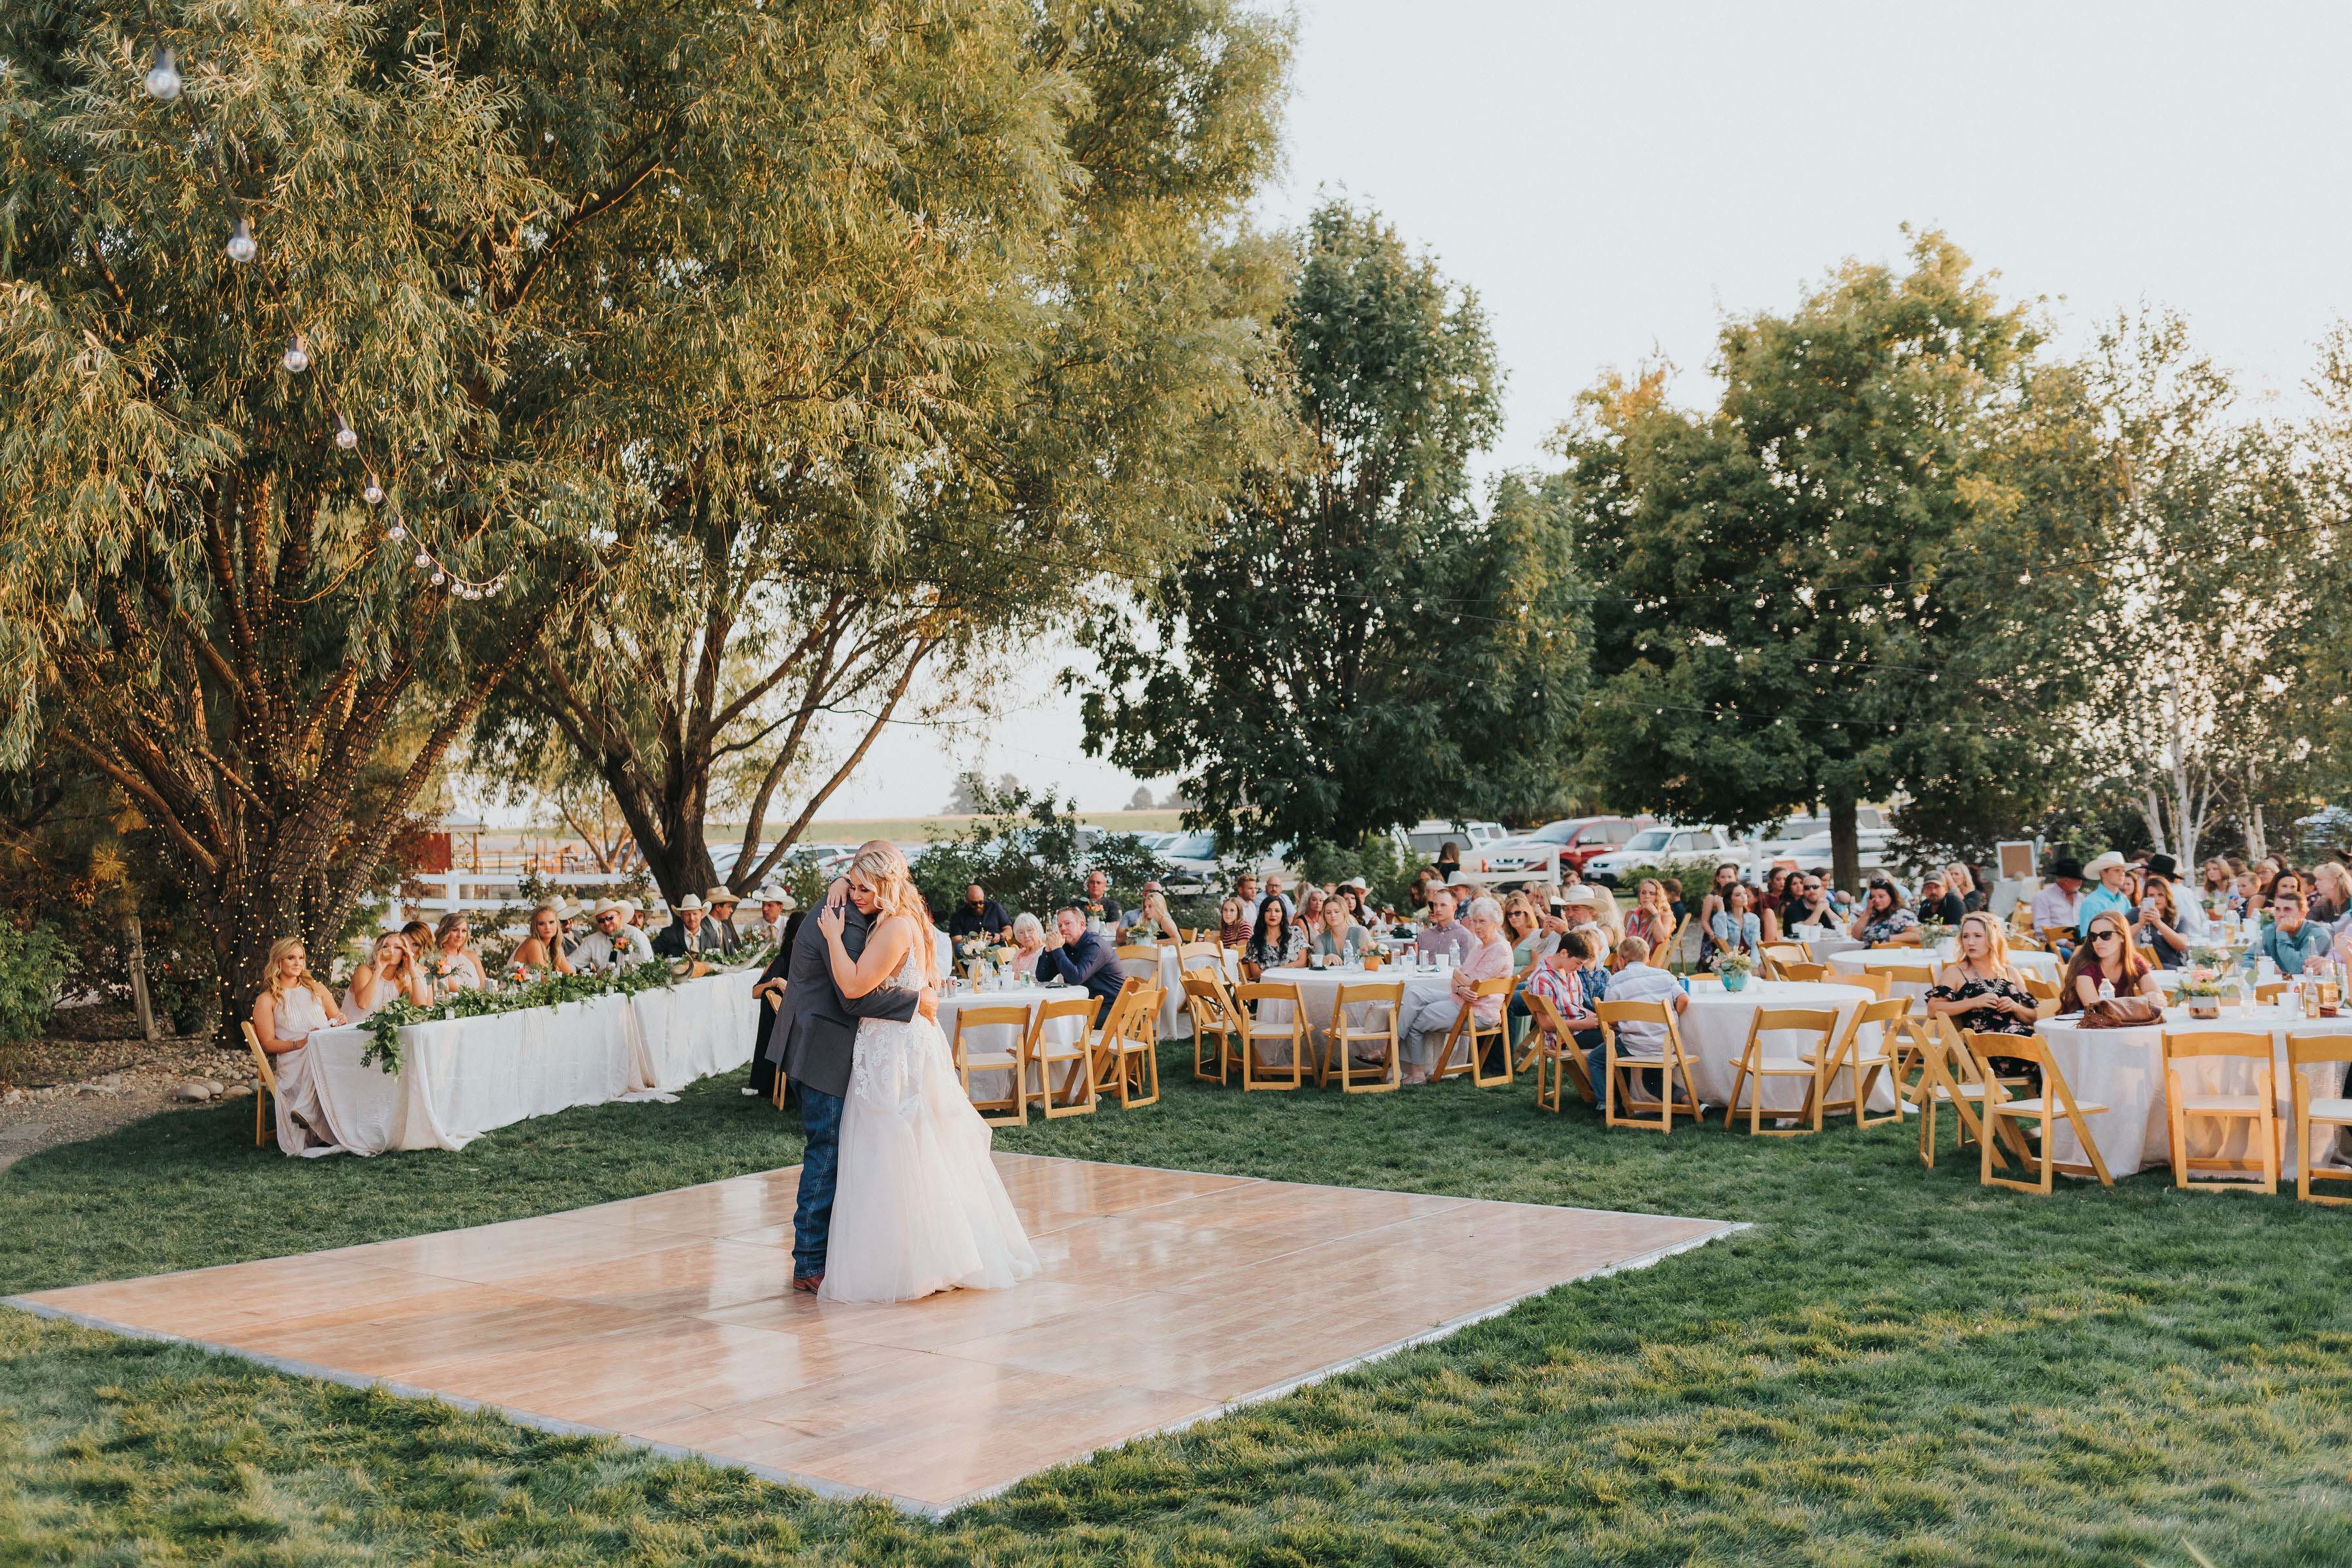 father, daughter dance in scenic Nampa, Idaho outdoor wedding venue